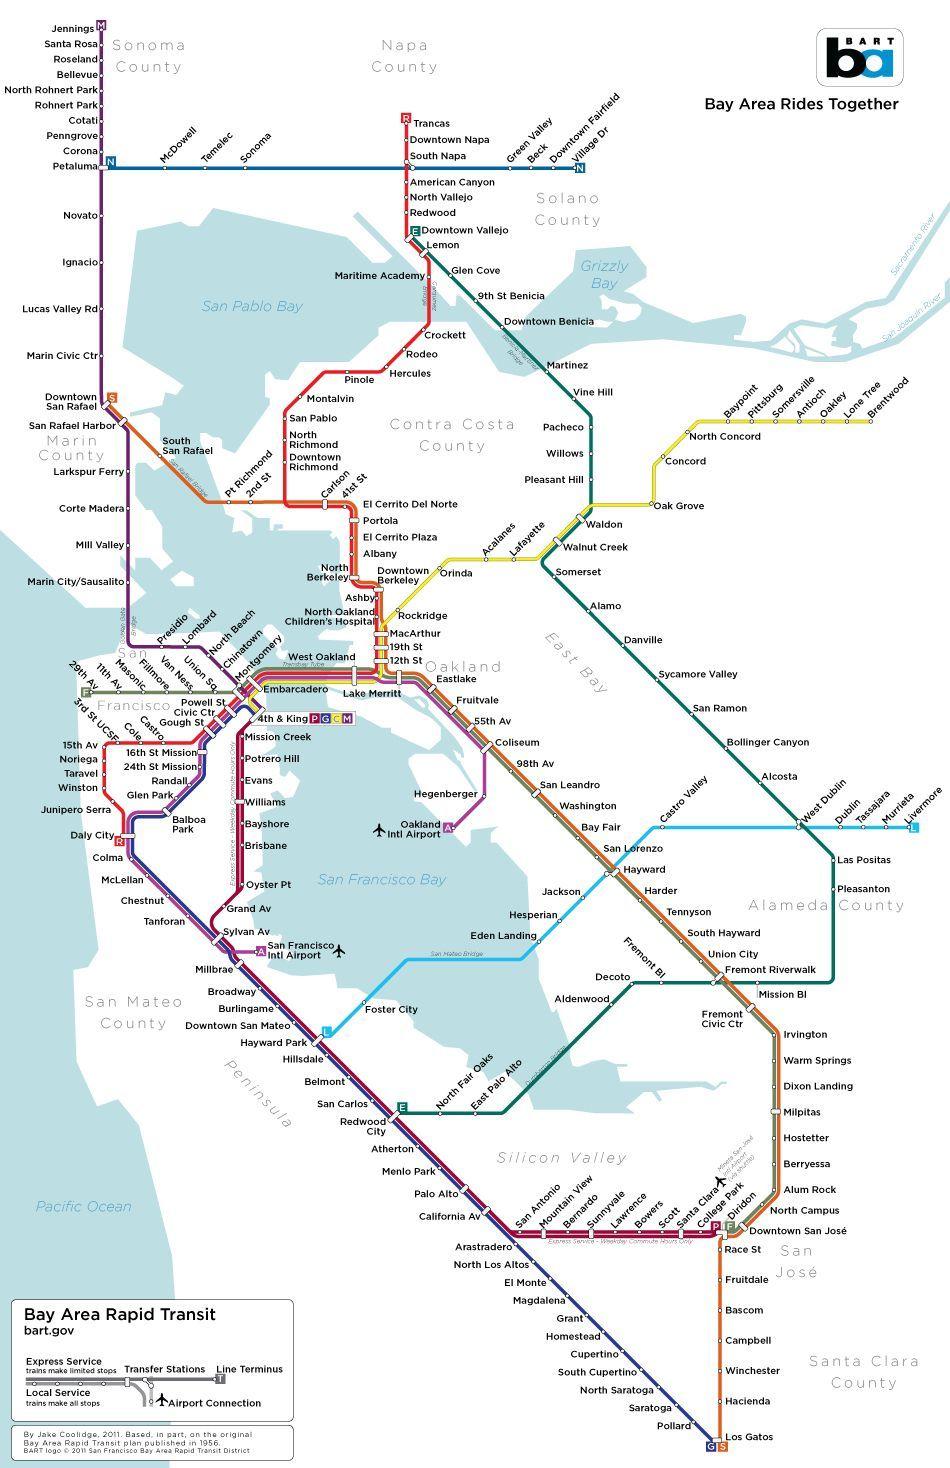 Bay Area Rapid Transit Logo - A map of San Francisco's subway system that almost was. Historical